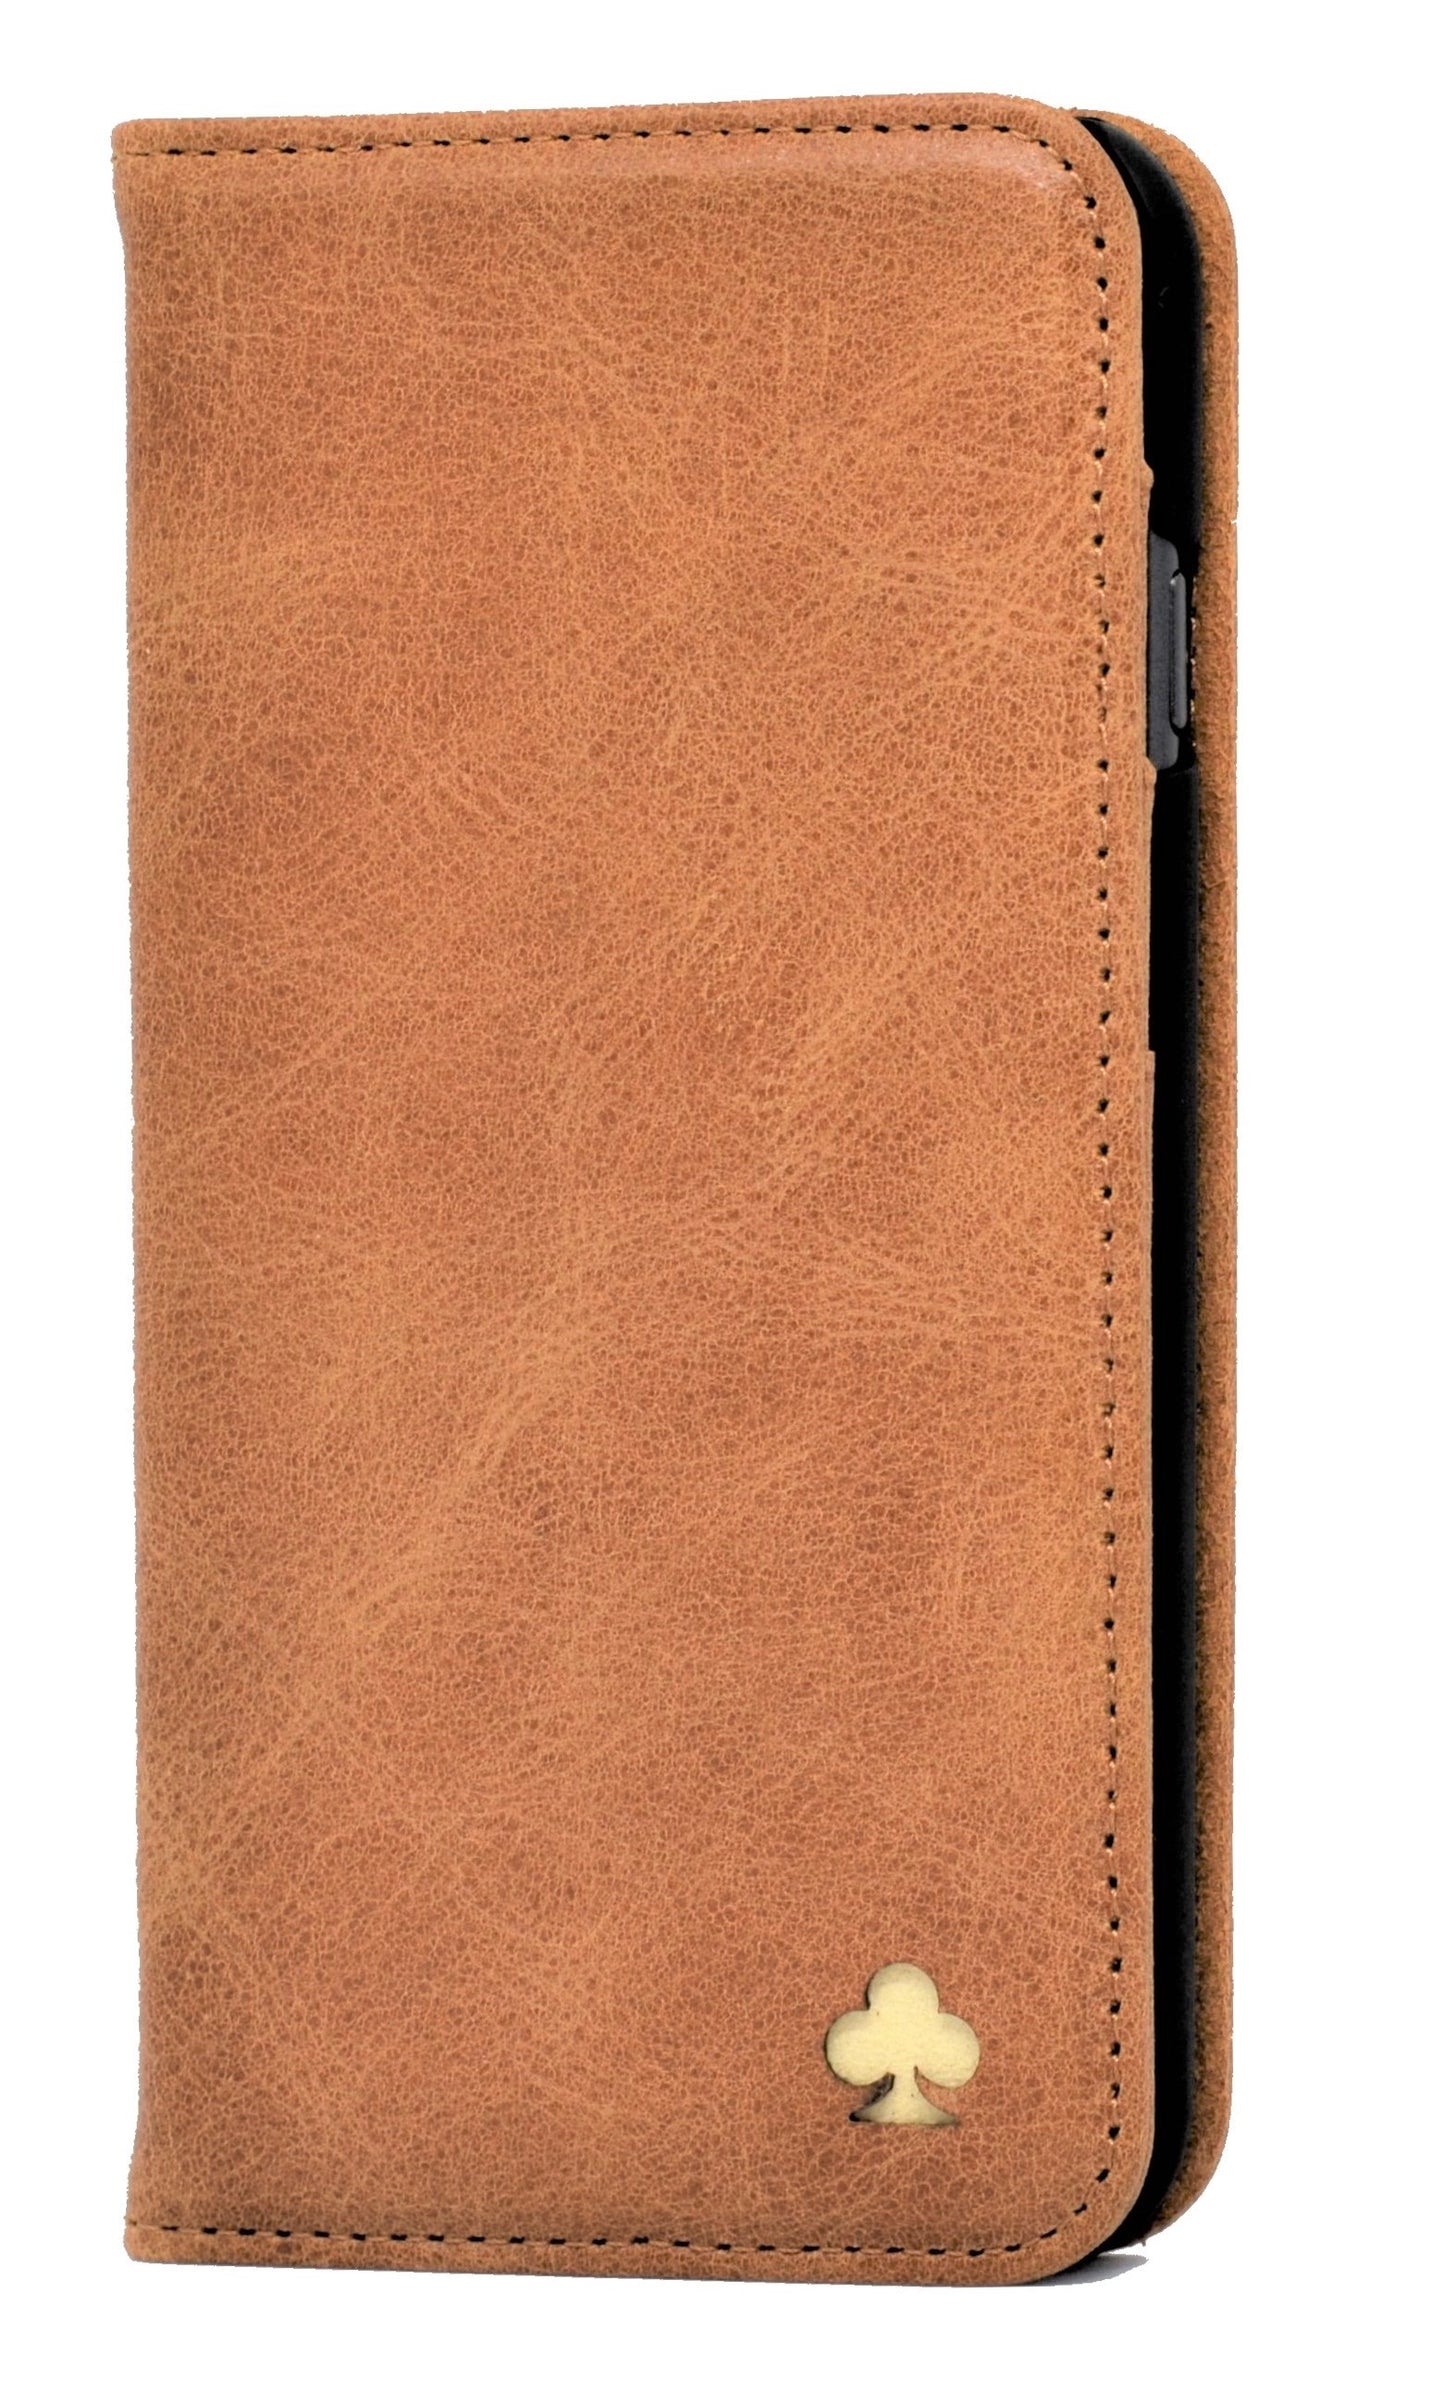 iPhone 12 Pro Max Leather Case. Premium Slim Genuine Leather Stand Case/Cover/Wallet (Tan)